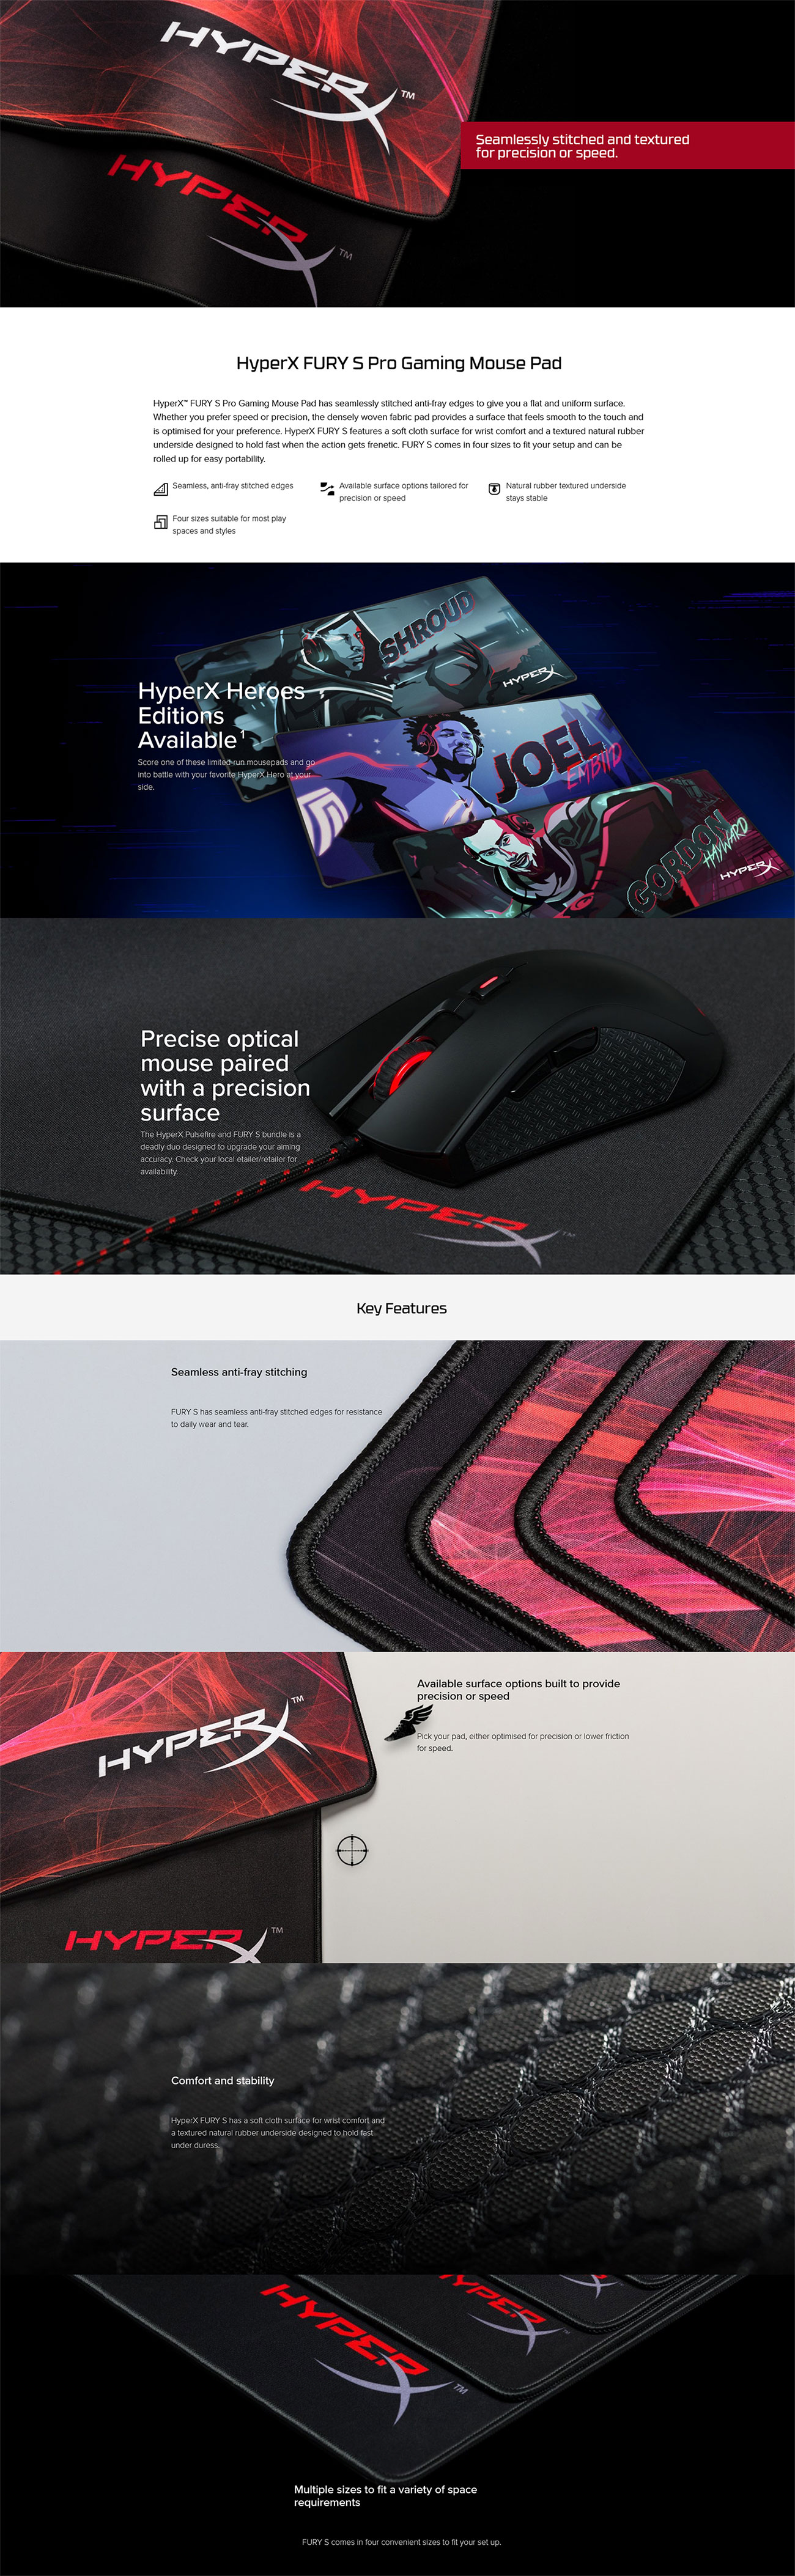 Kingston HyperX Fury S Speed Edition Pro Gaming Mouse Mat - Large HX-MPFS-S-L